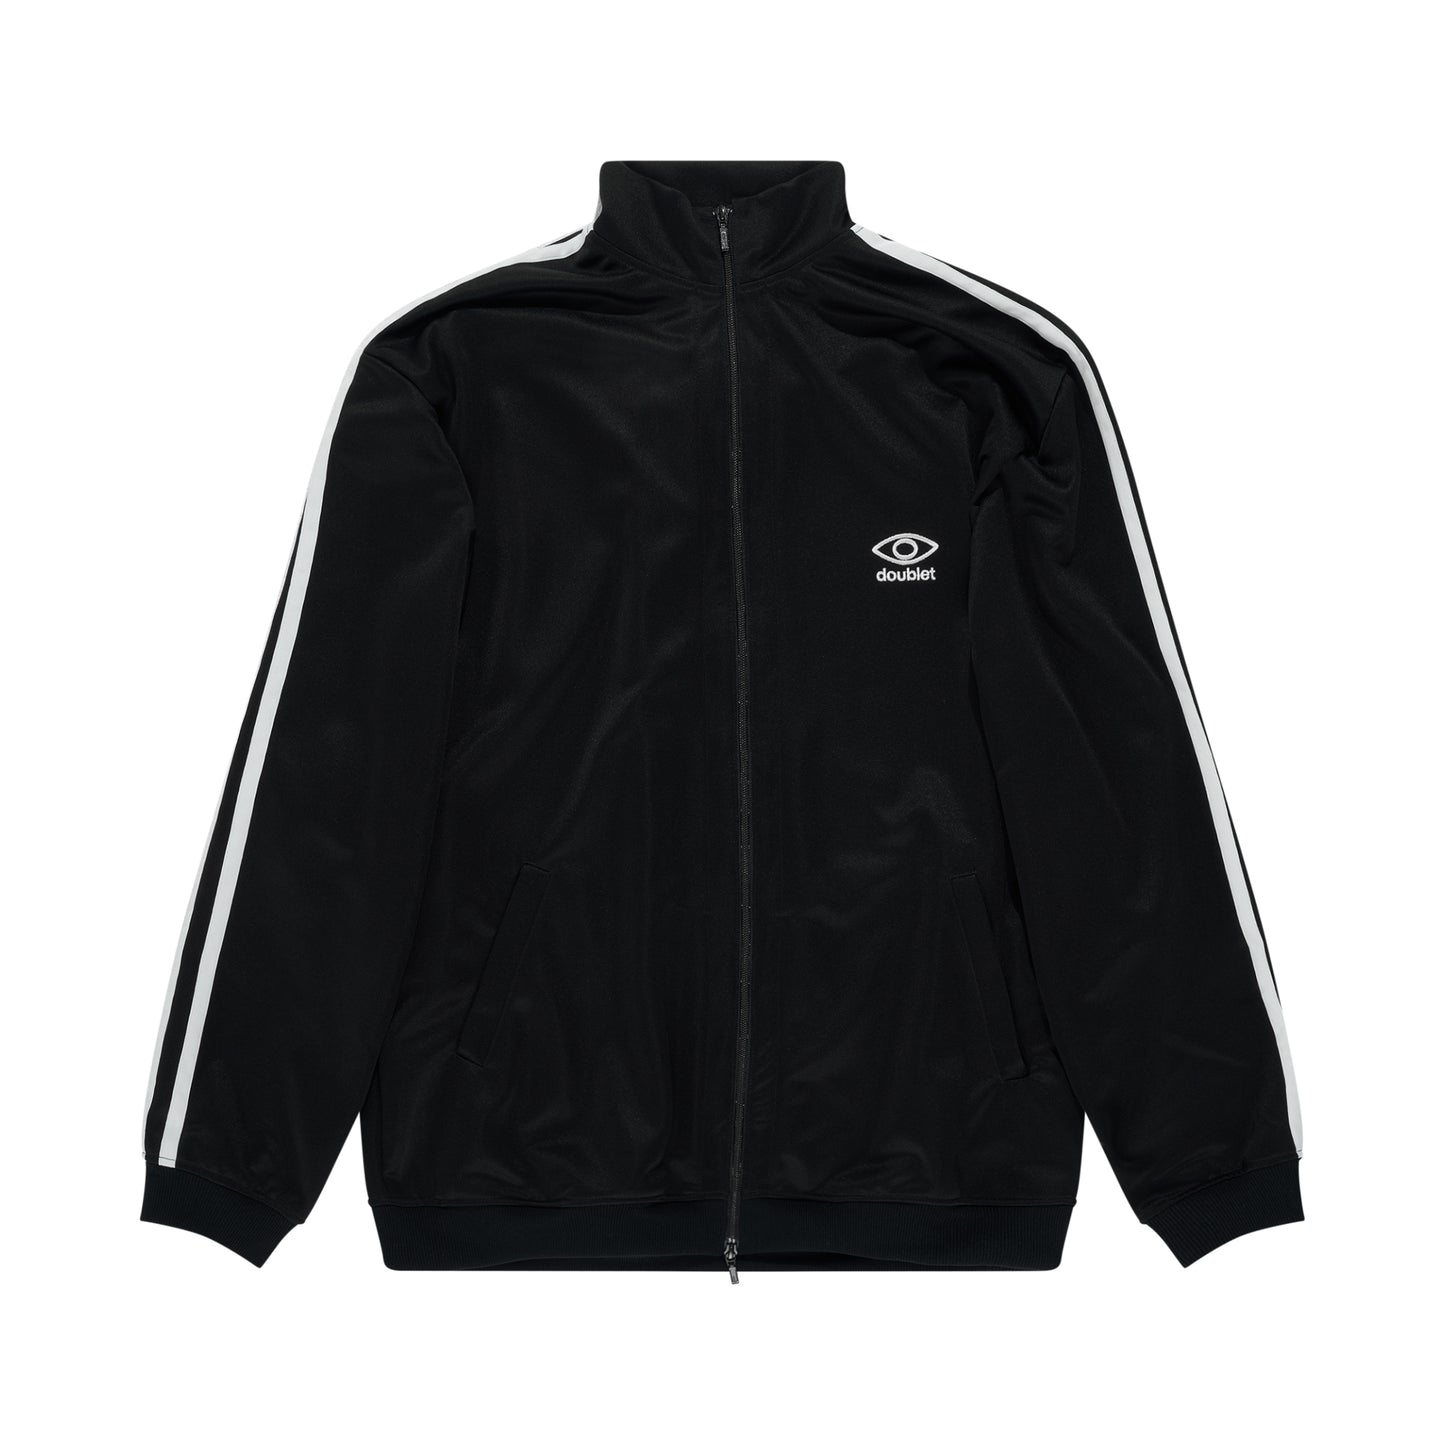 Invisible Track Jacket in Black